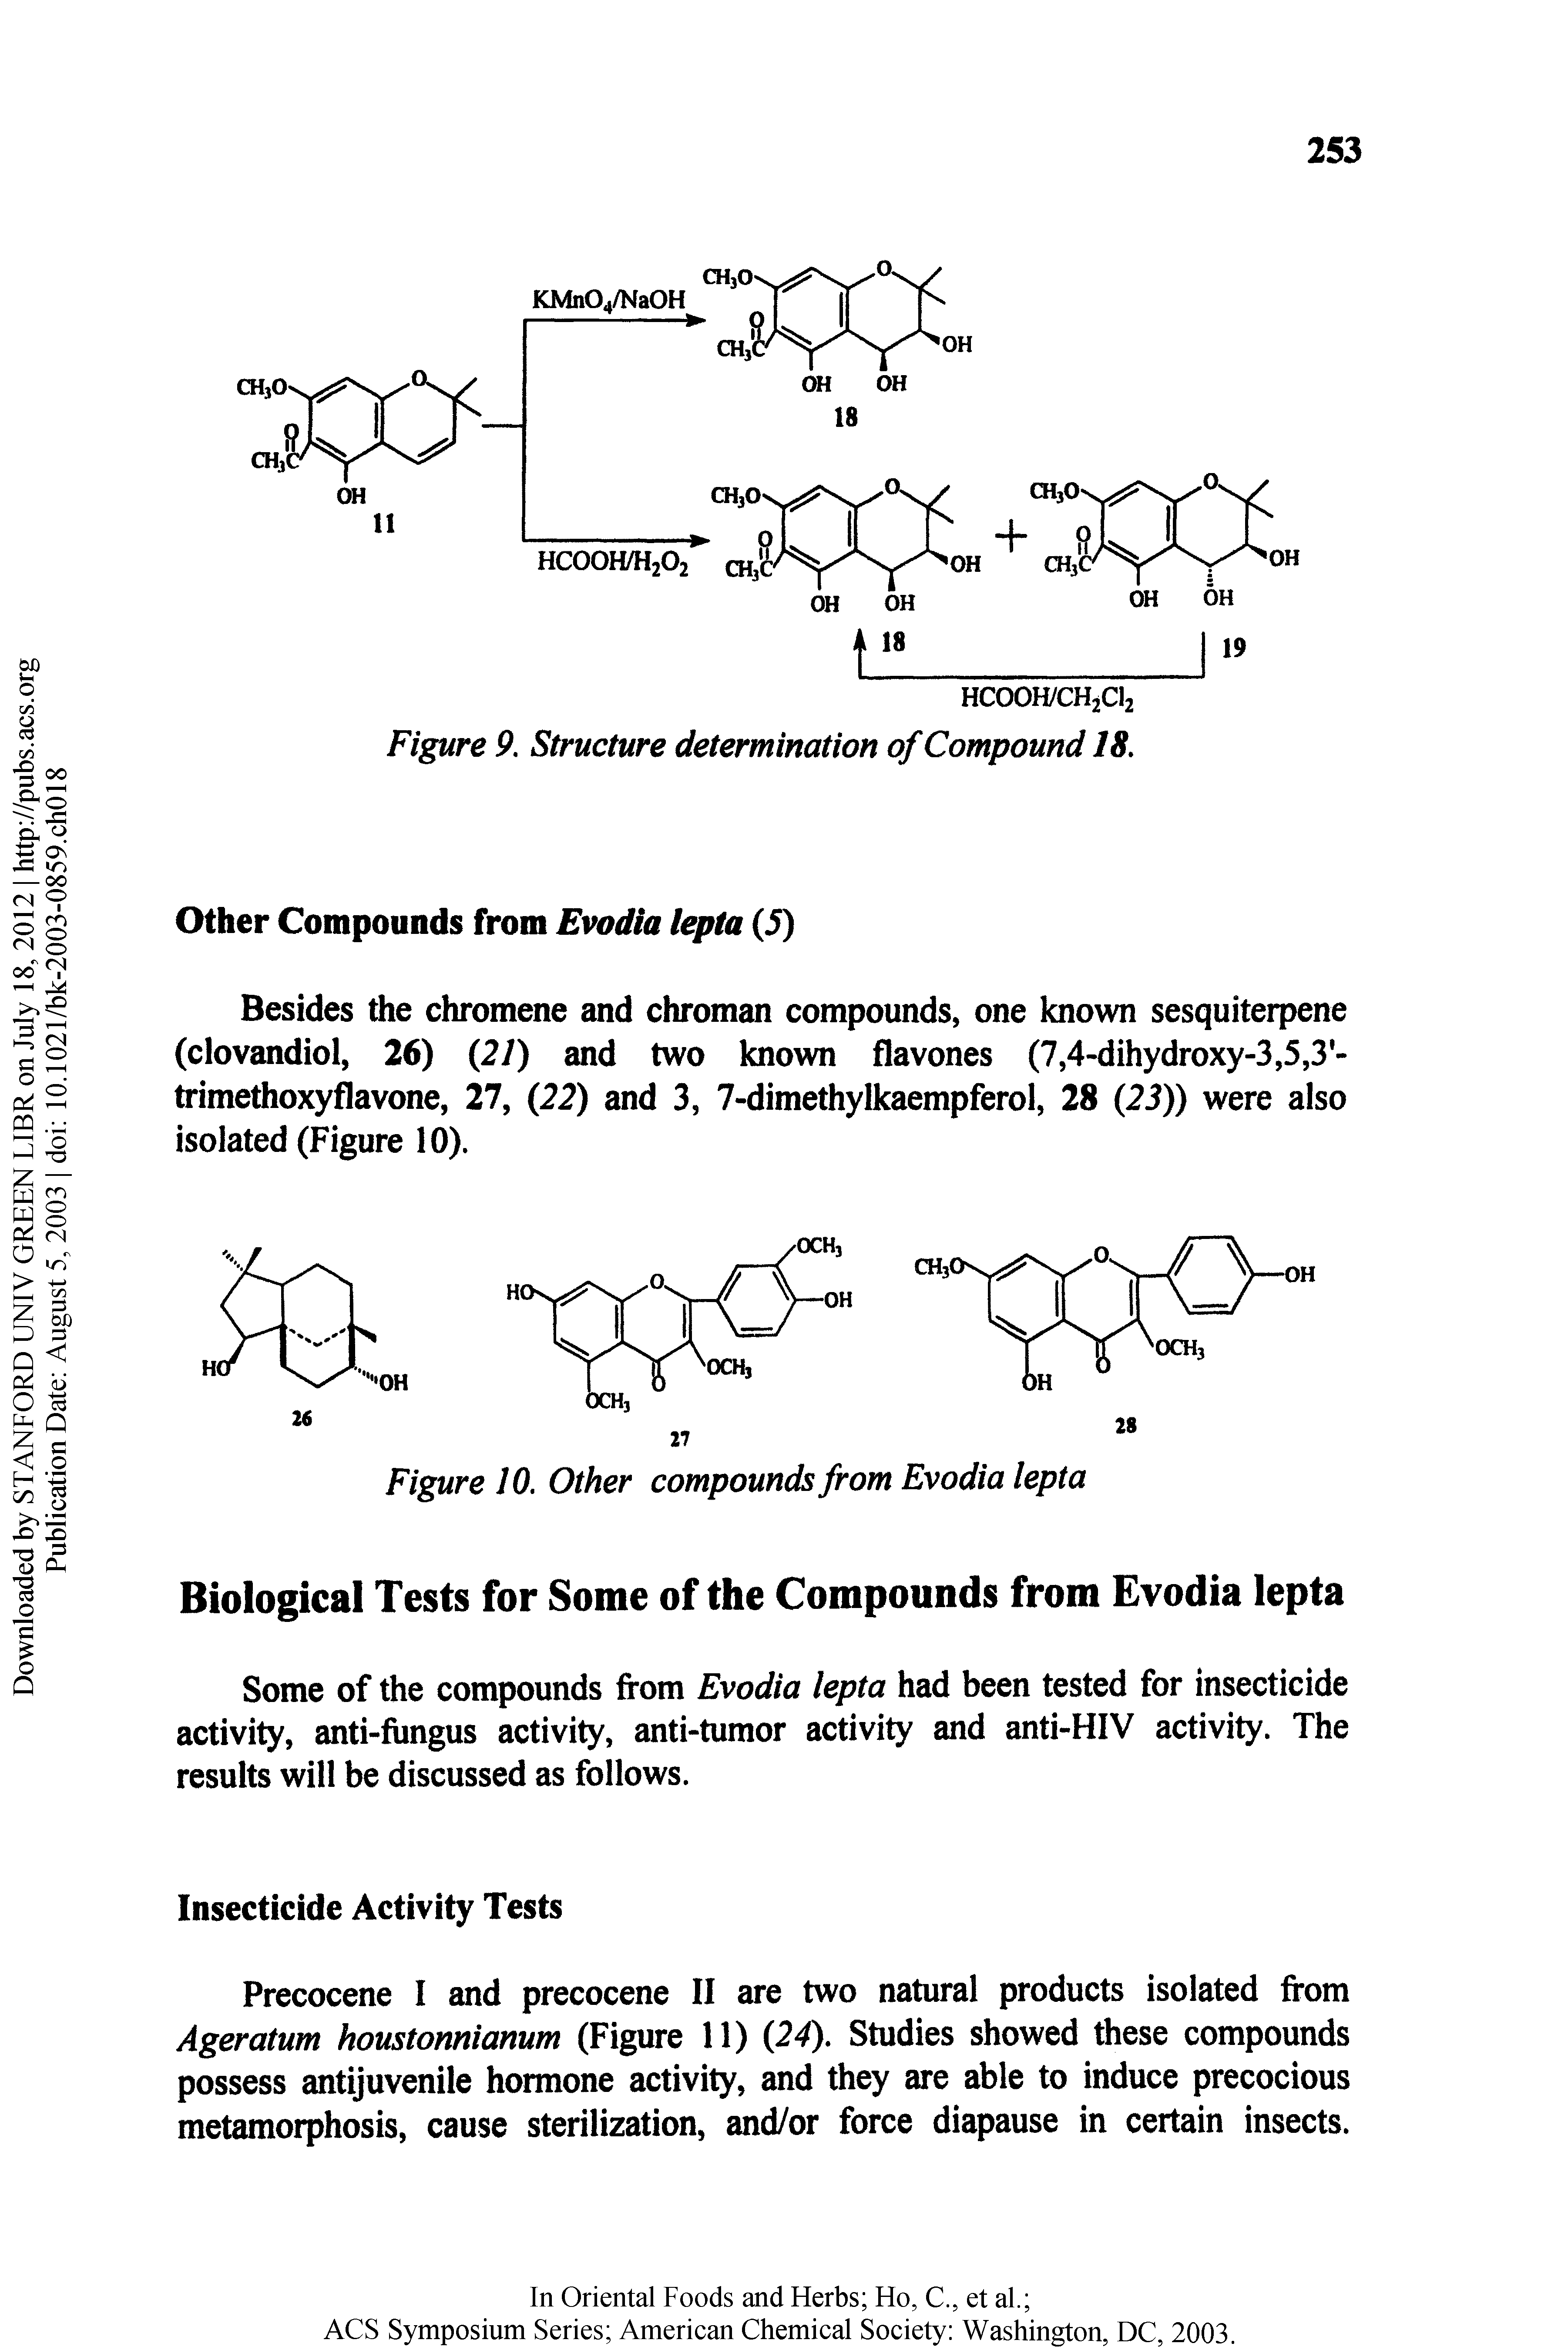 Figure 10. Other compounds from Evodia lepta...